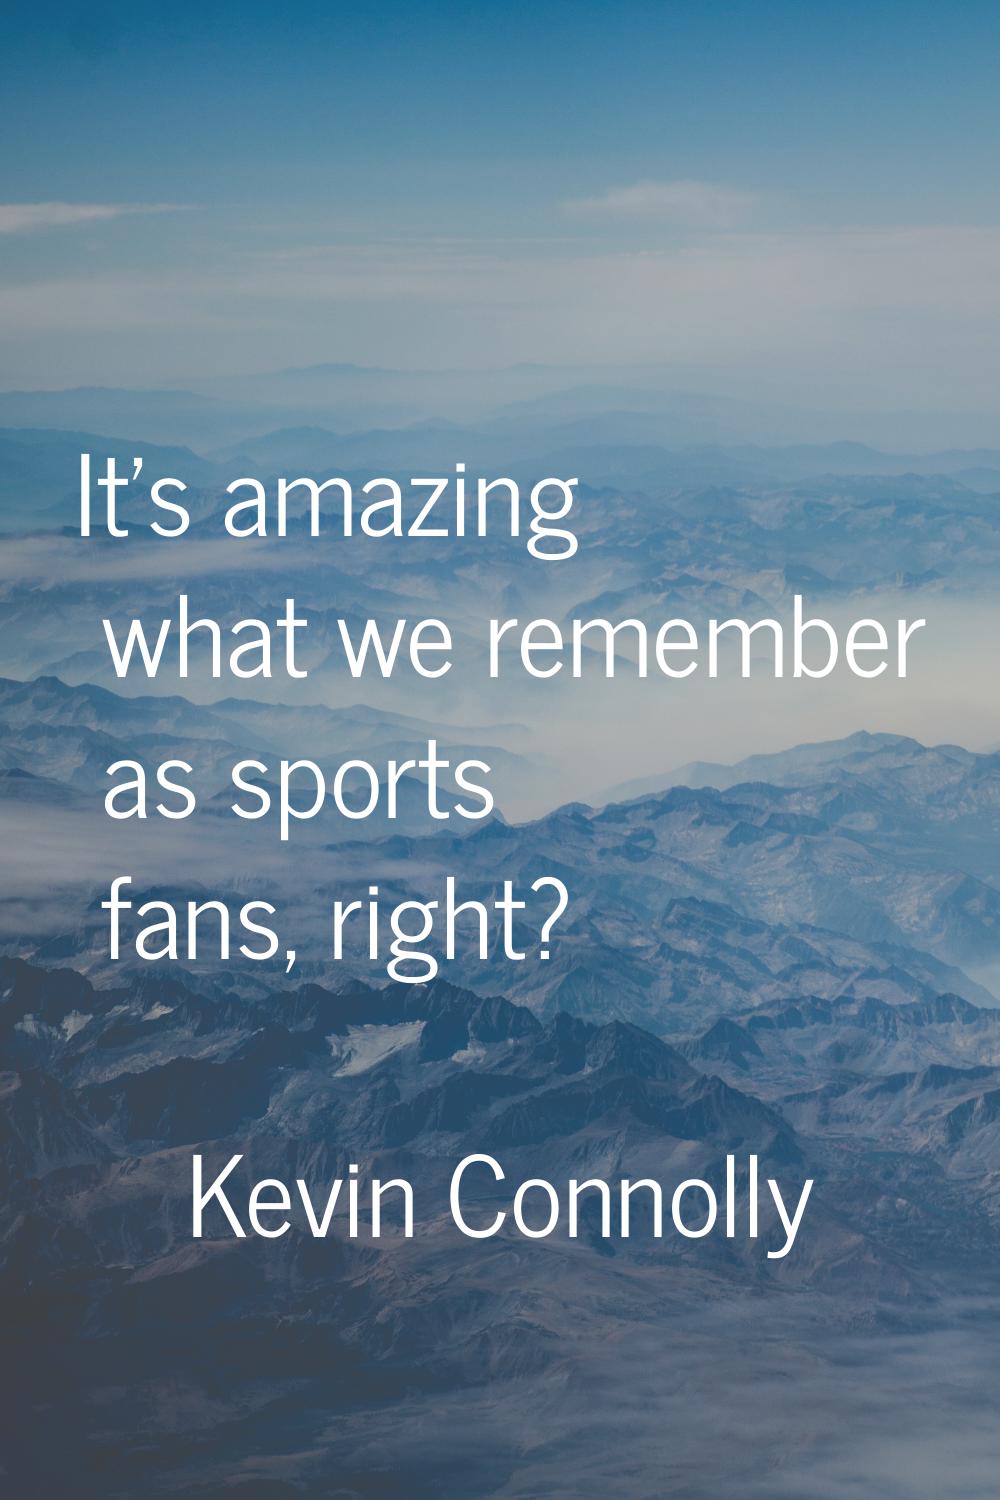 It's amazing what we remember as sports fans, right?